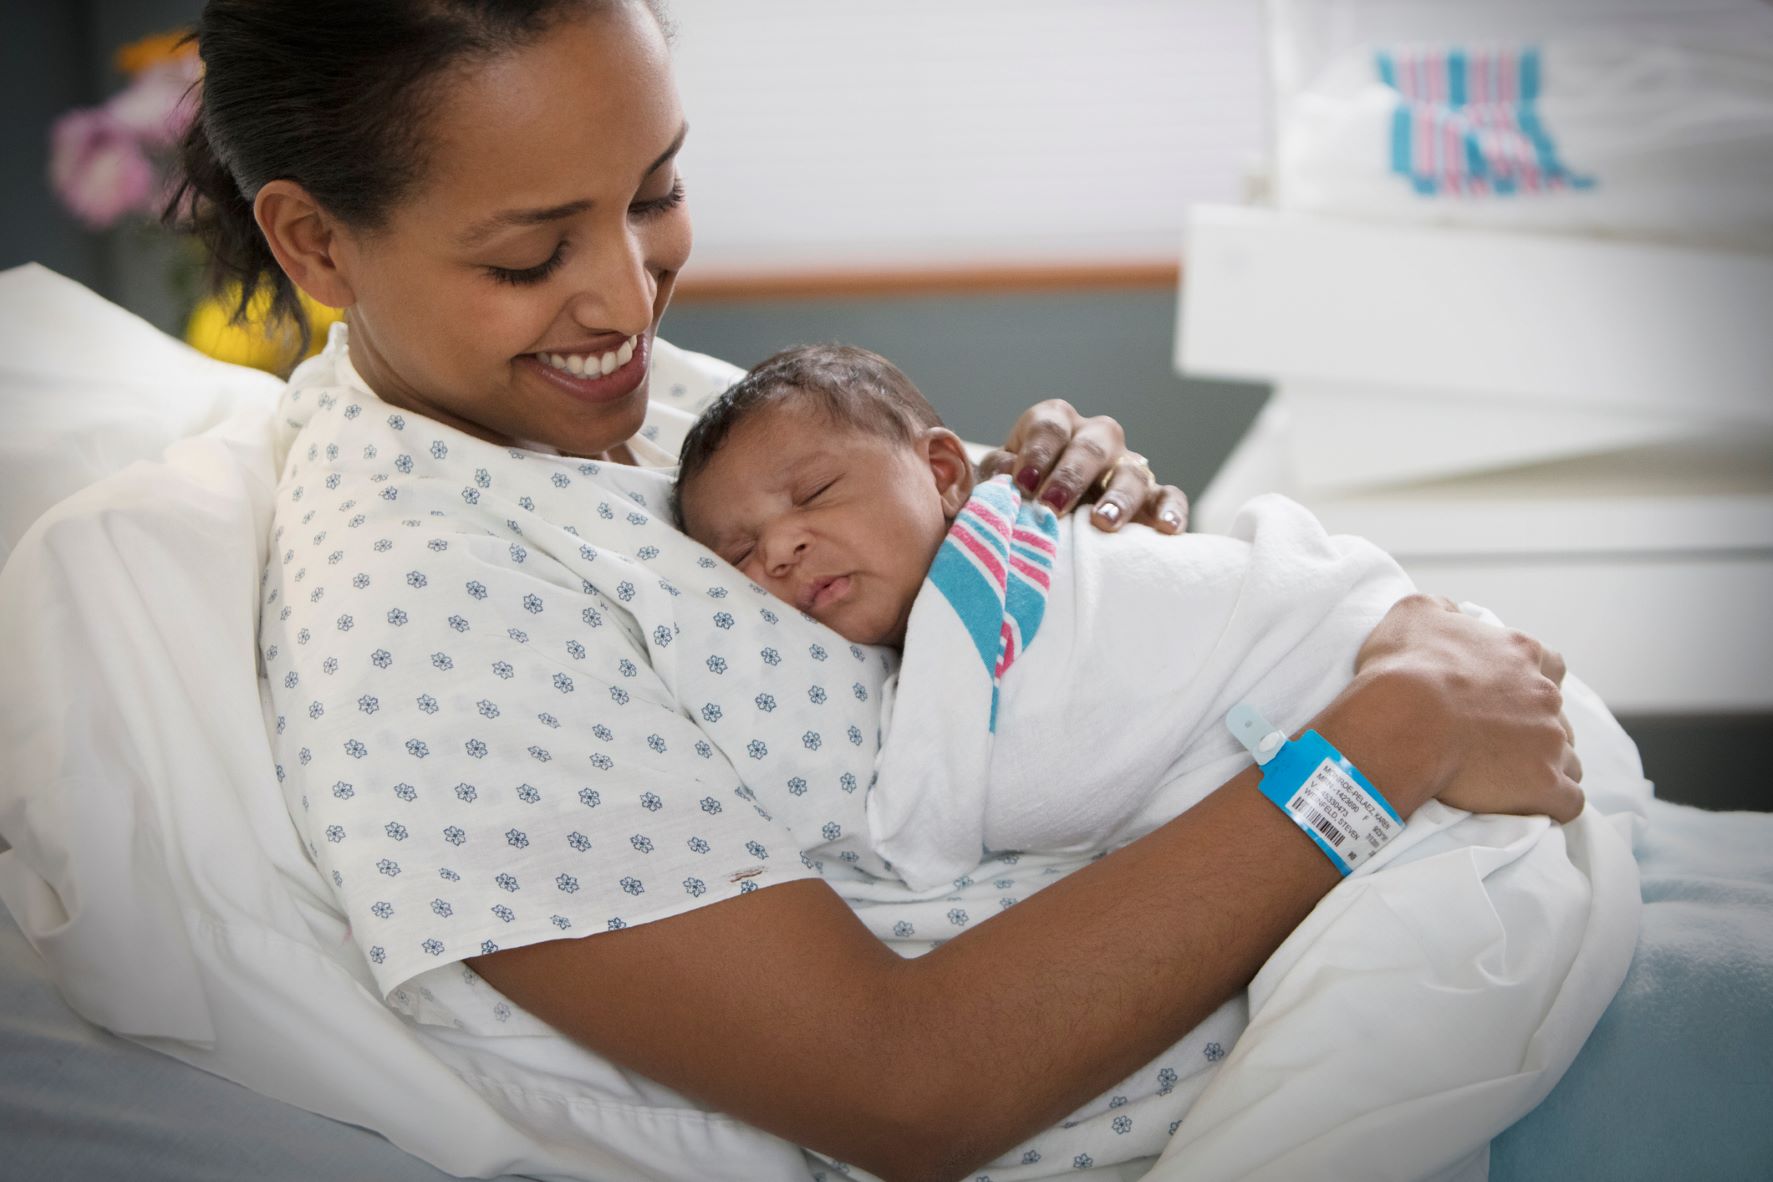 Image of a person holding a newborn baby in a hospital bed